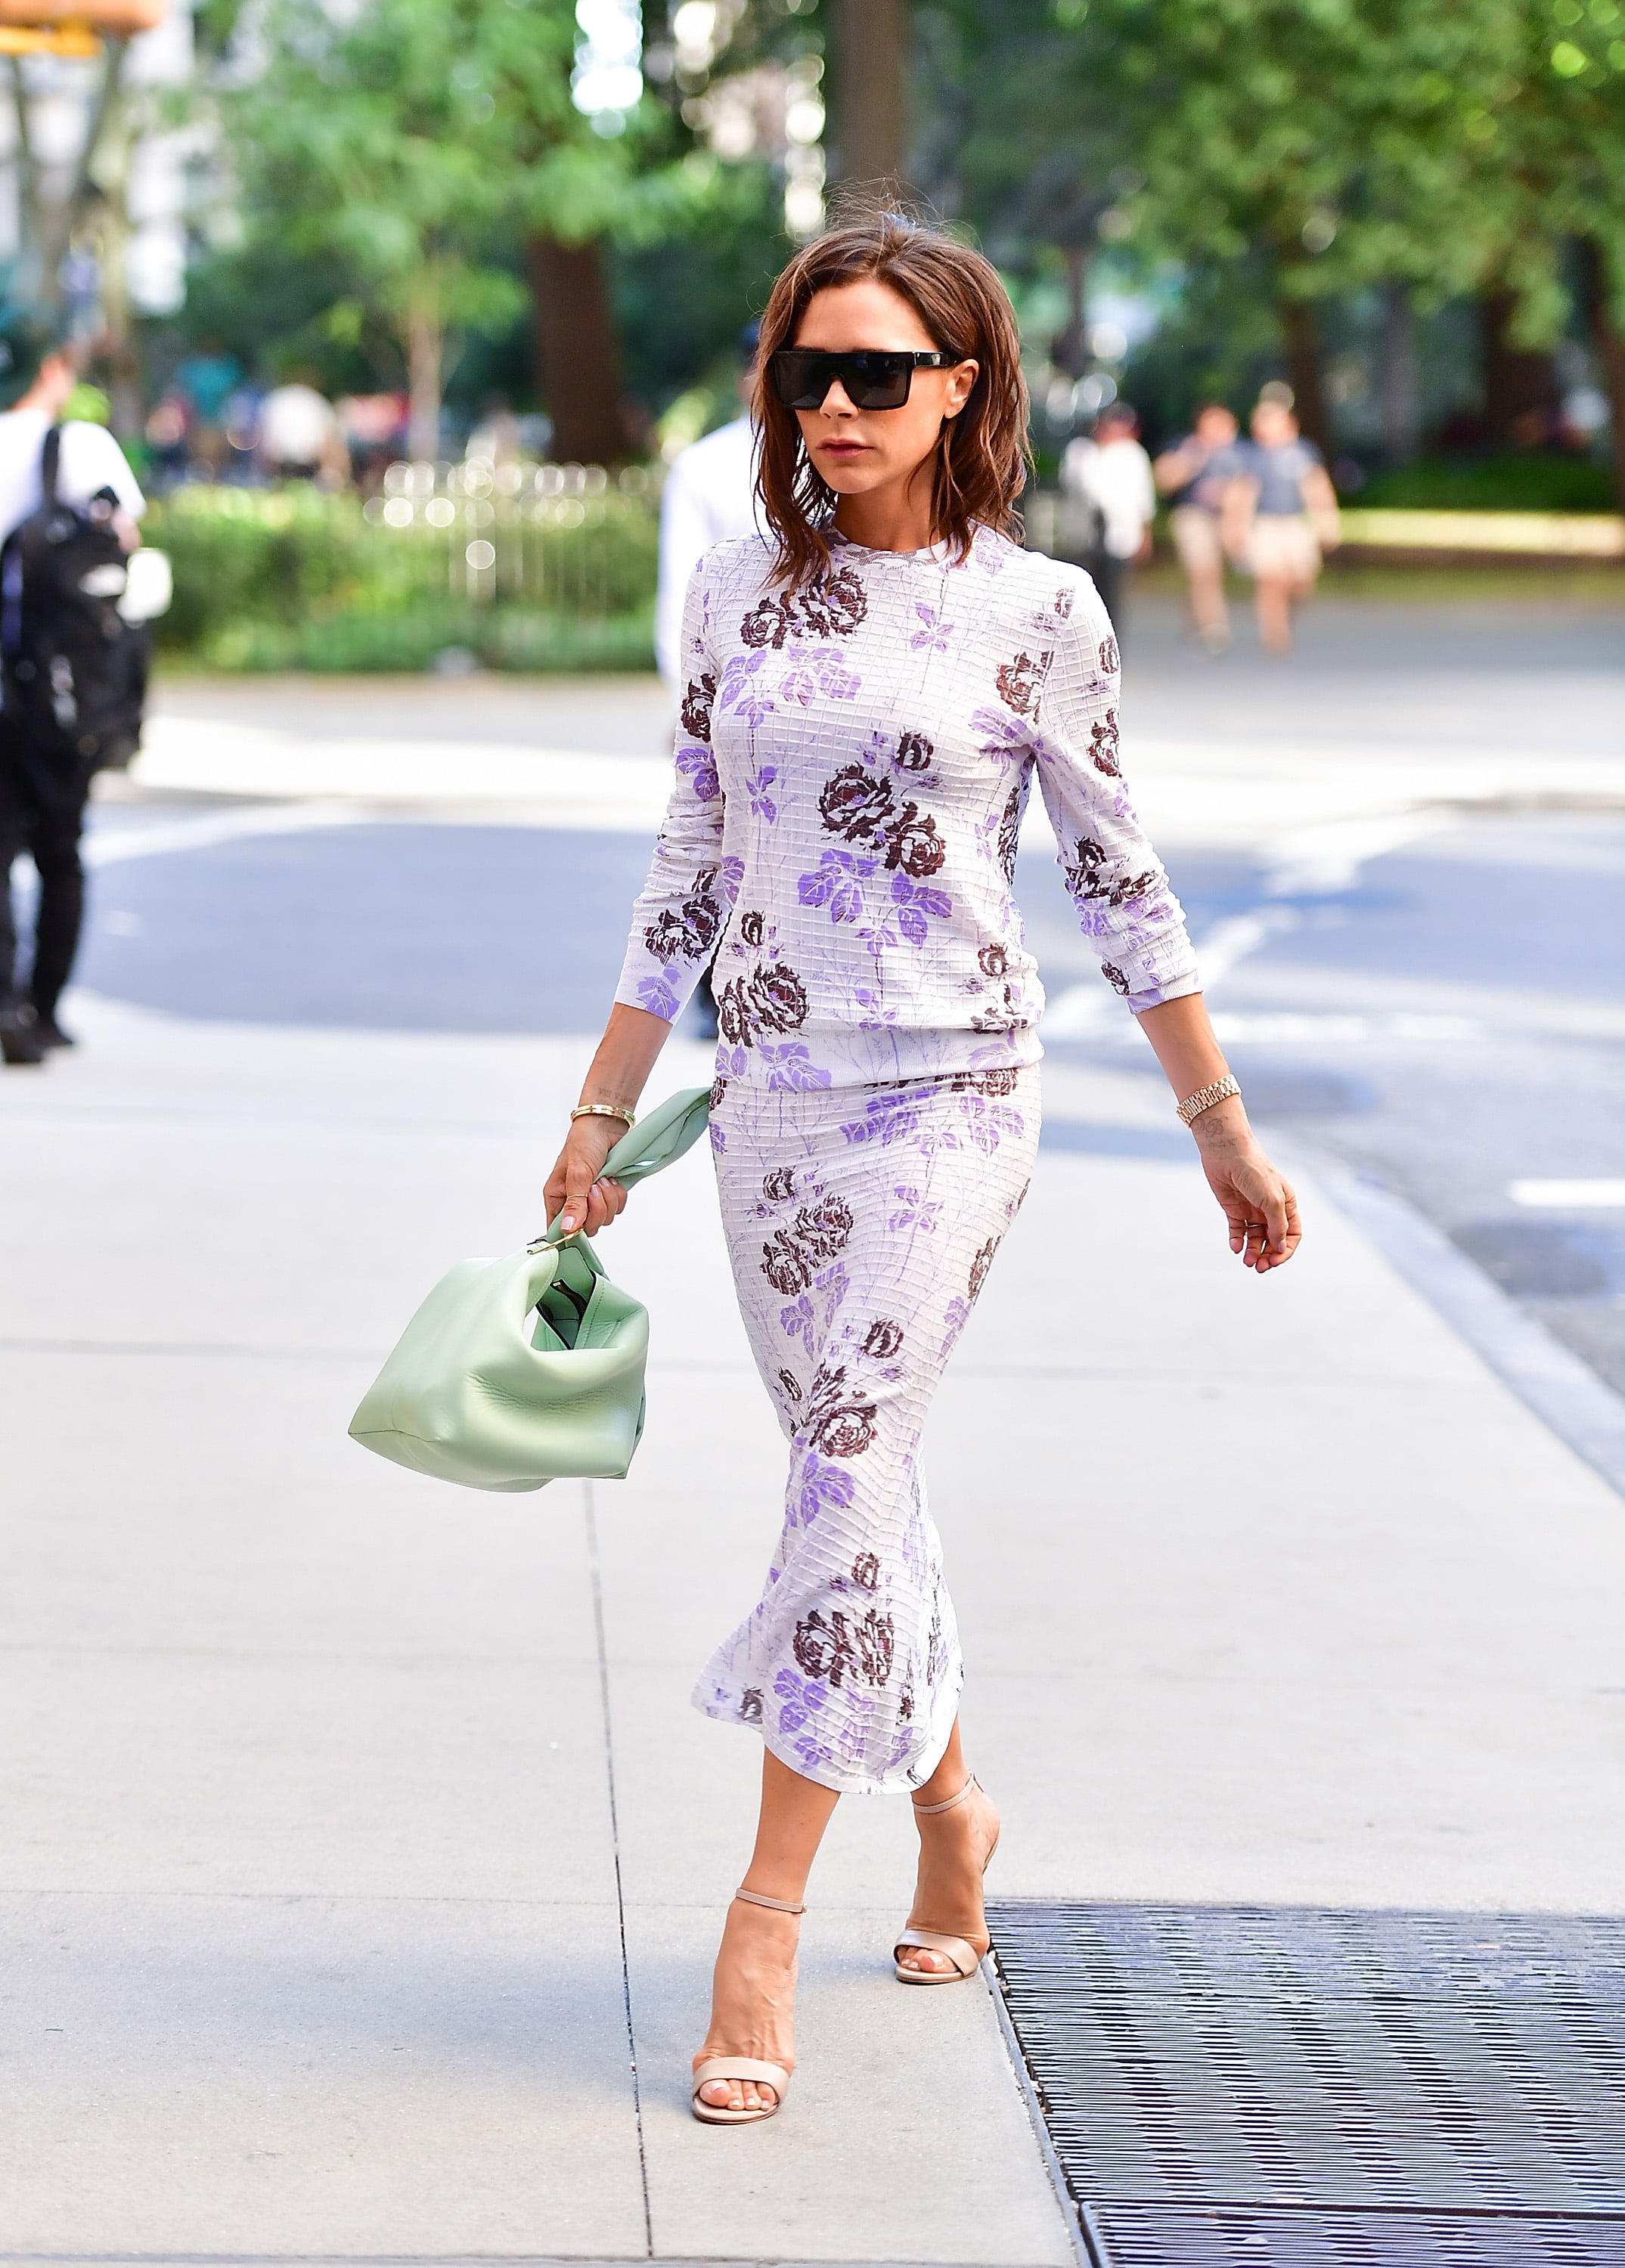 Victoria Beckham On Her New Bag Collection